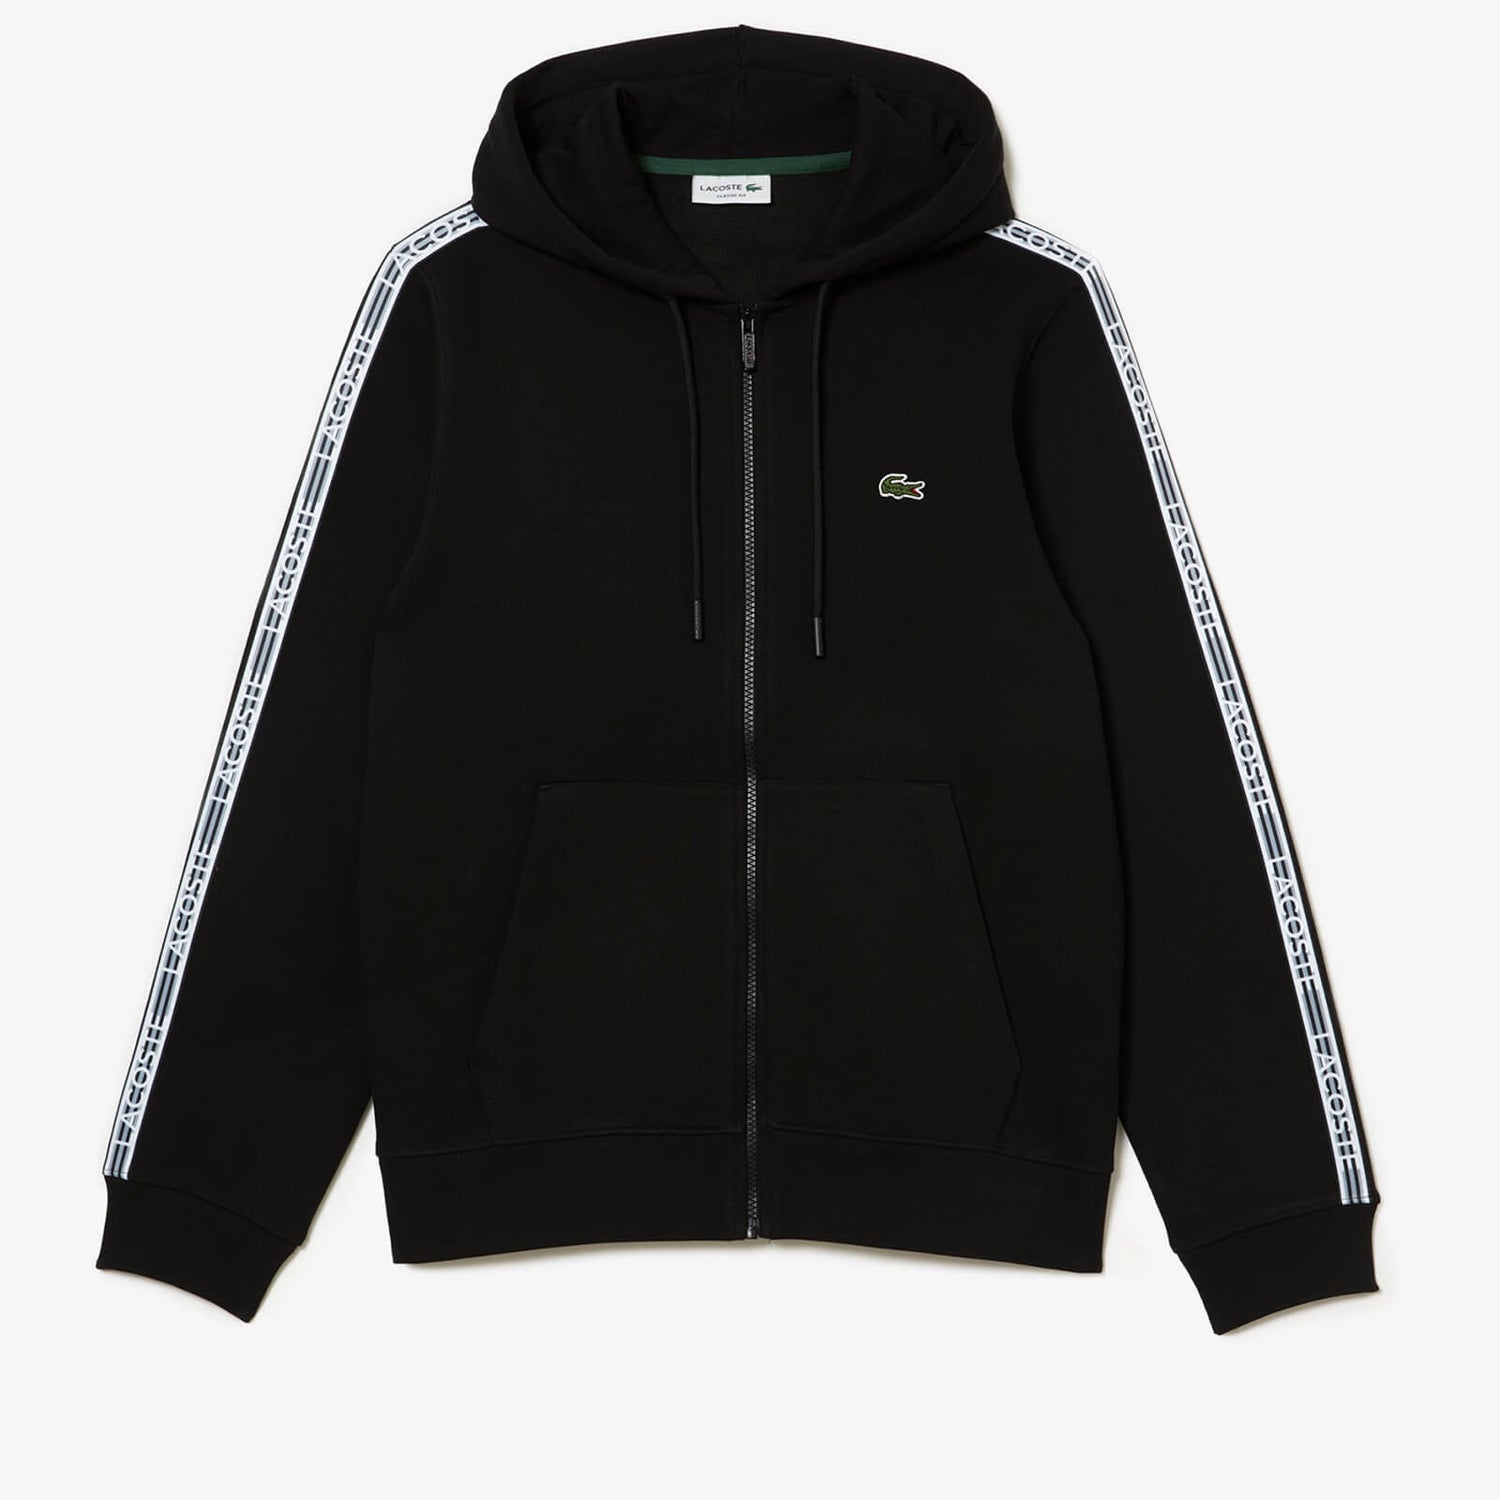 Lacoste Tape Cotton-Blend Hoodie - S